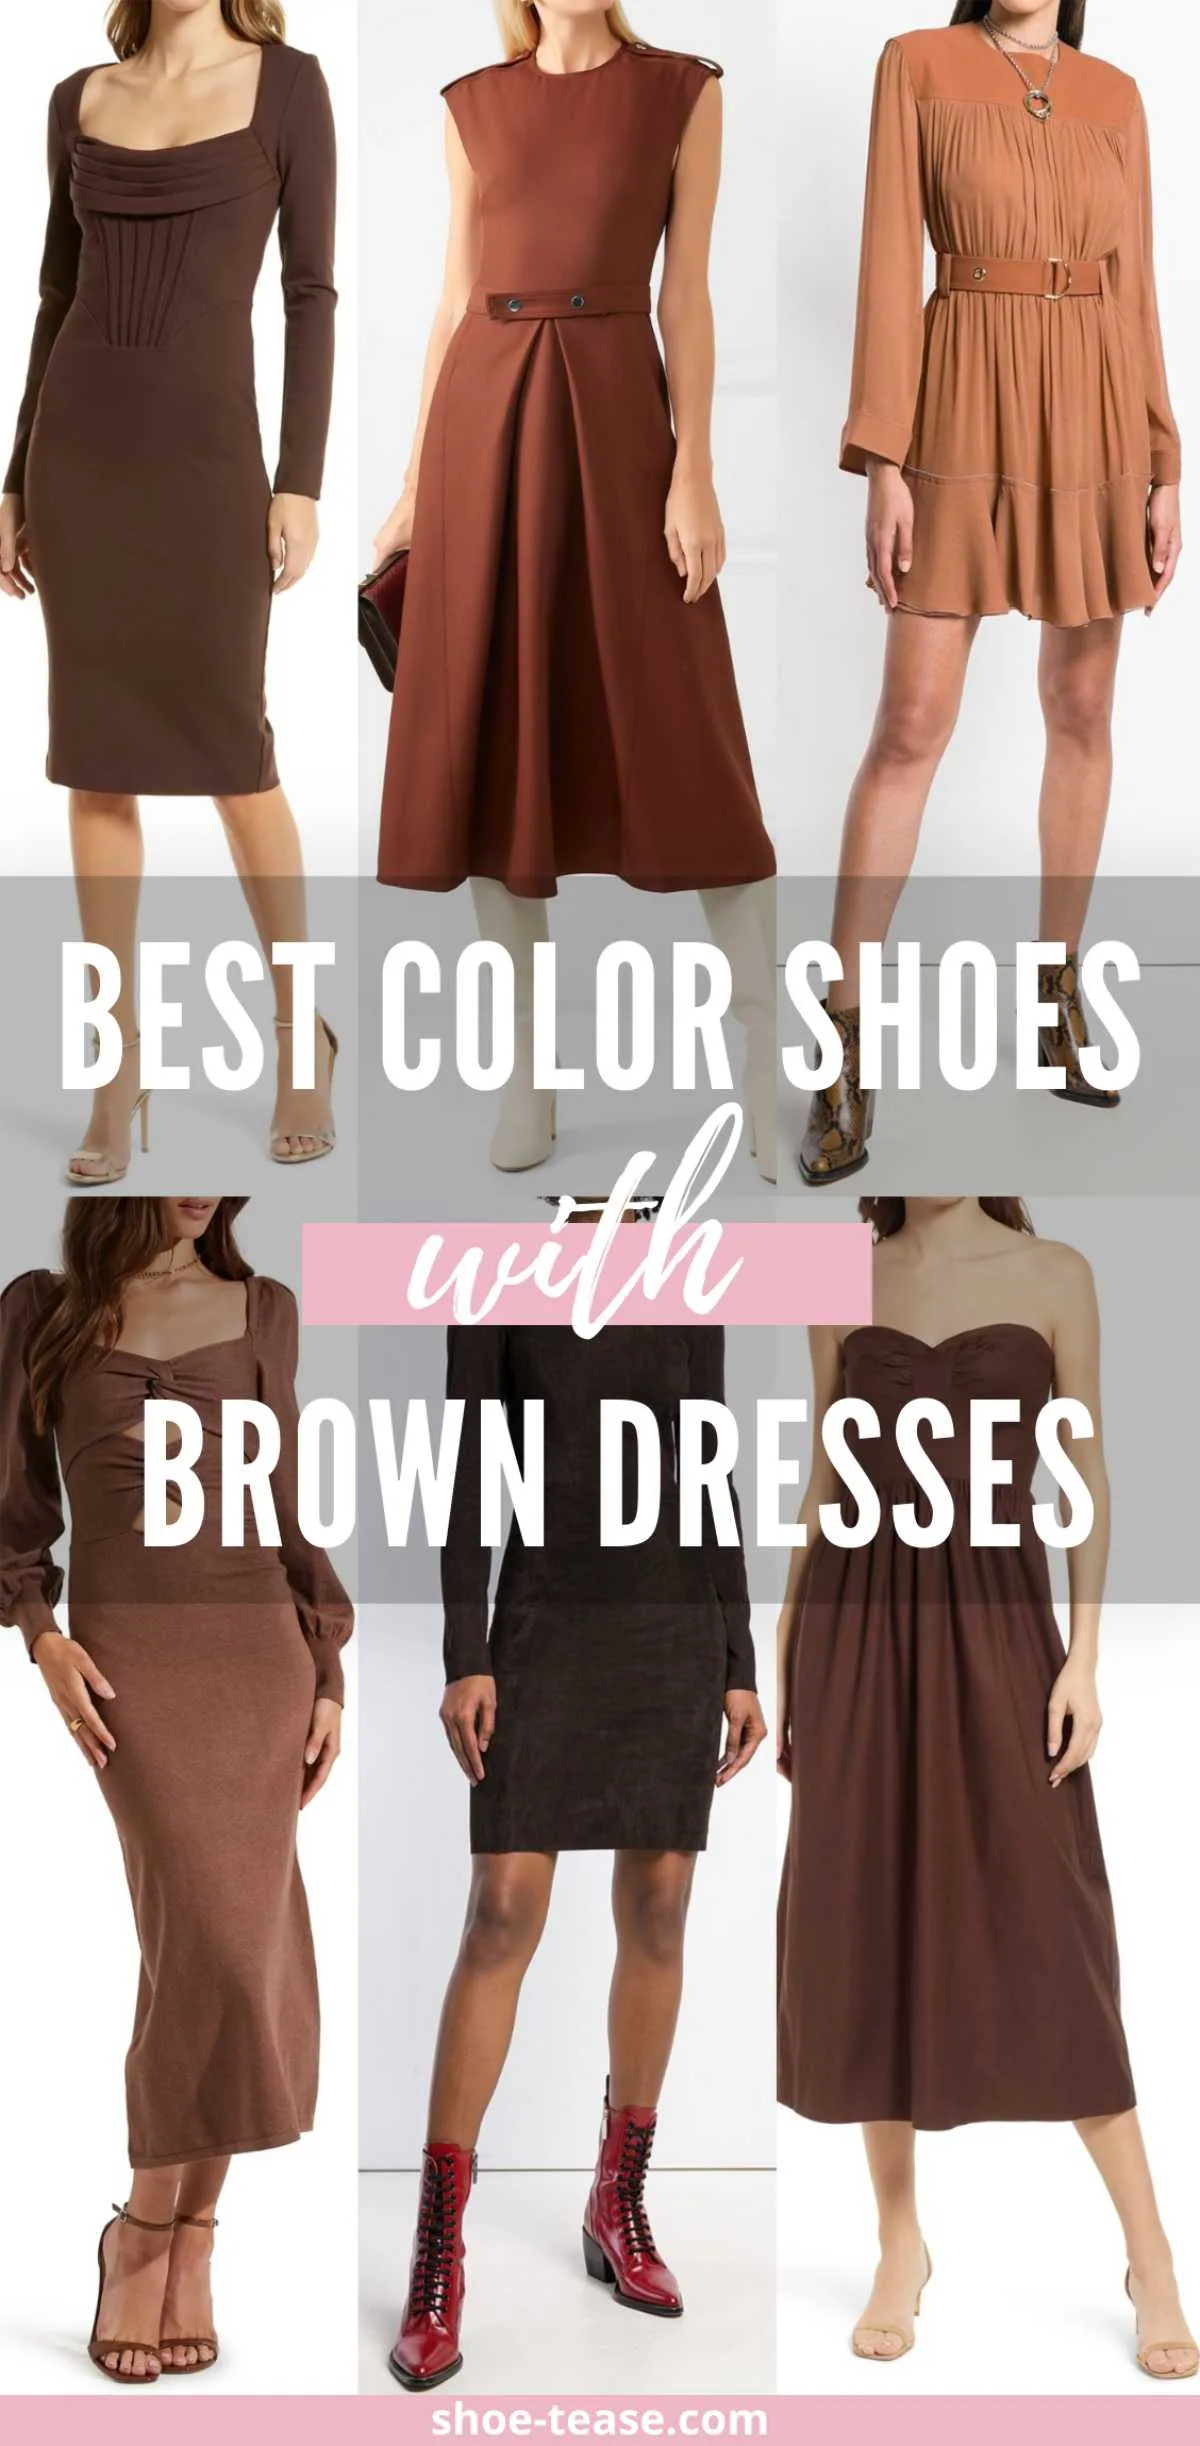 6 women wearing different styles and color shoes with brown dress outfits.